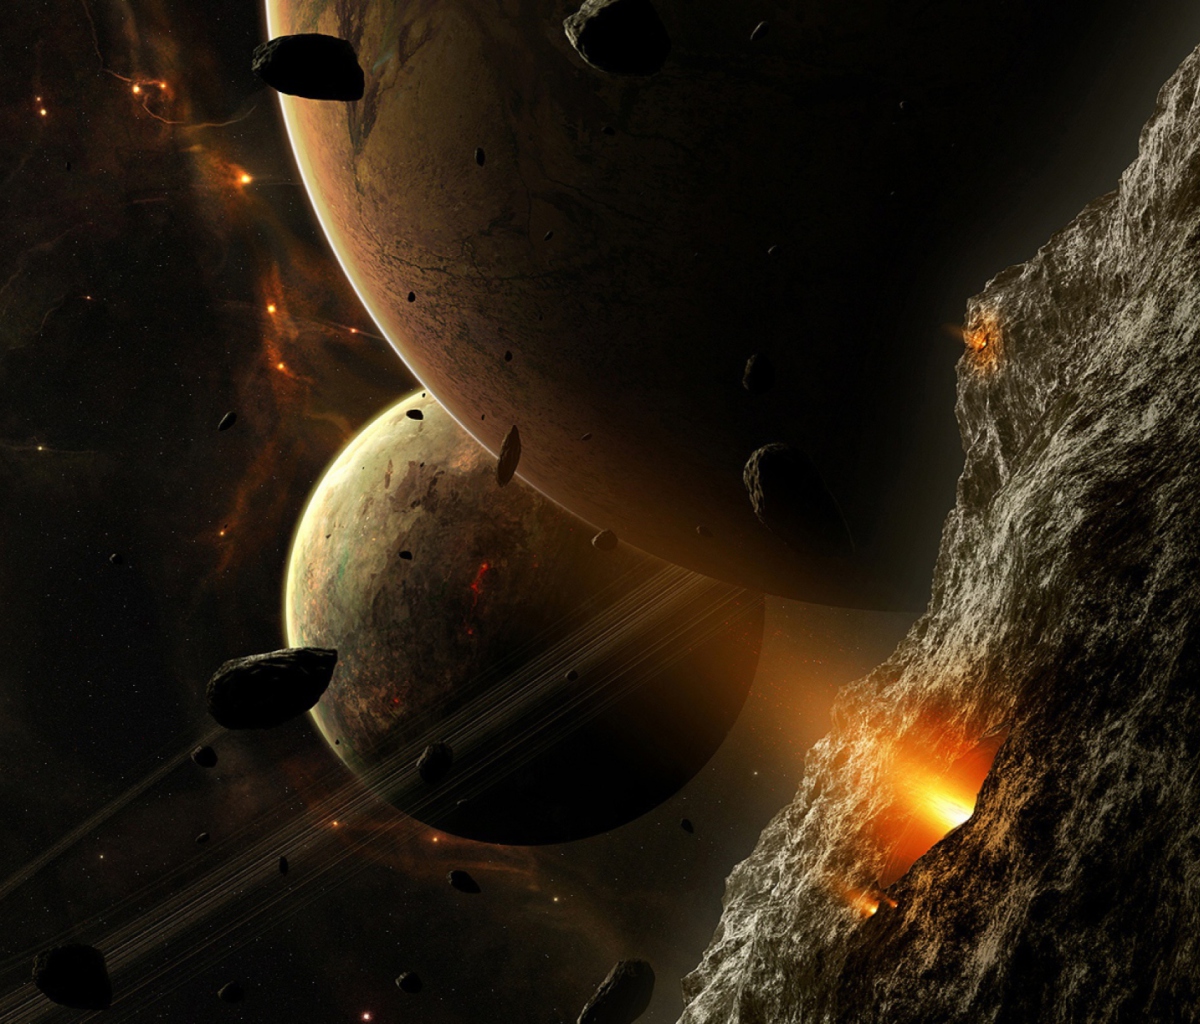 Asteroids And Planets wallpaper 1200x1024